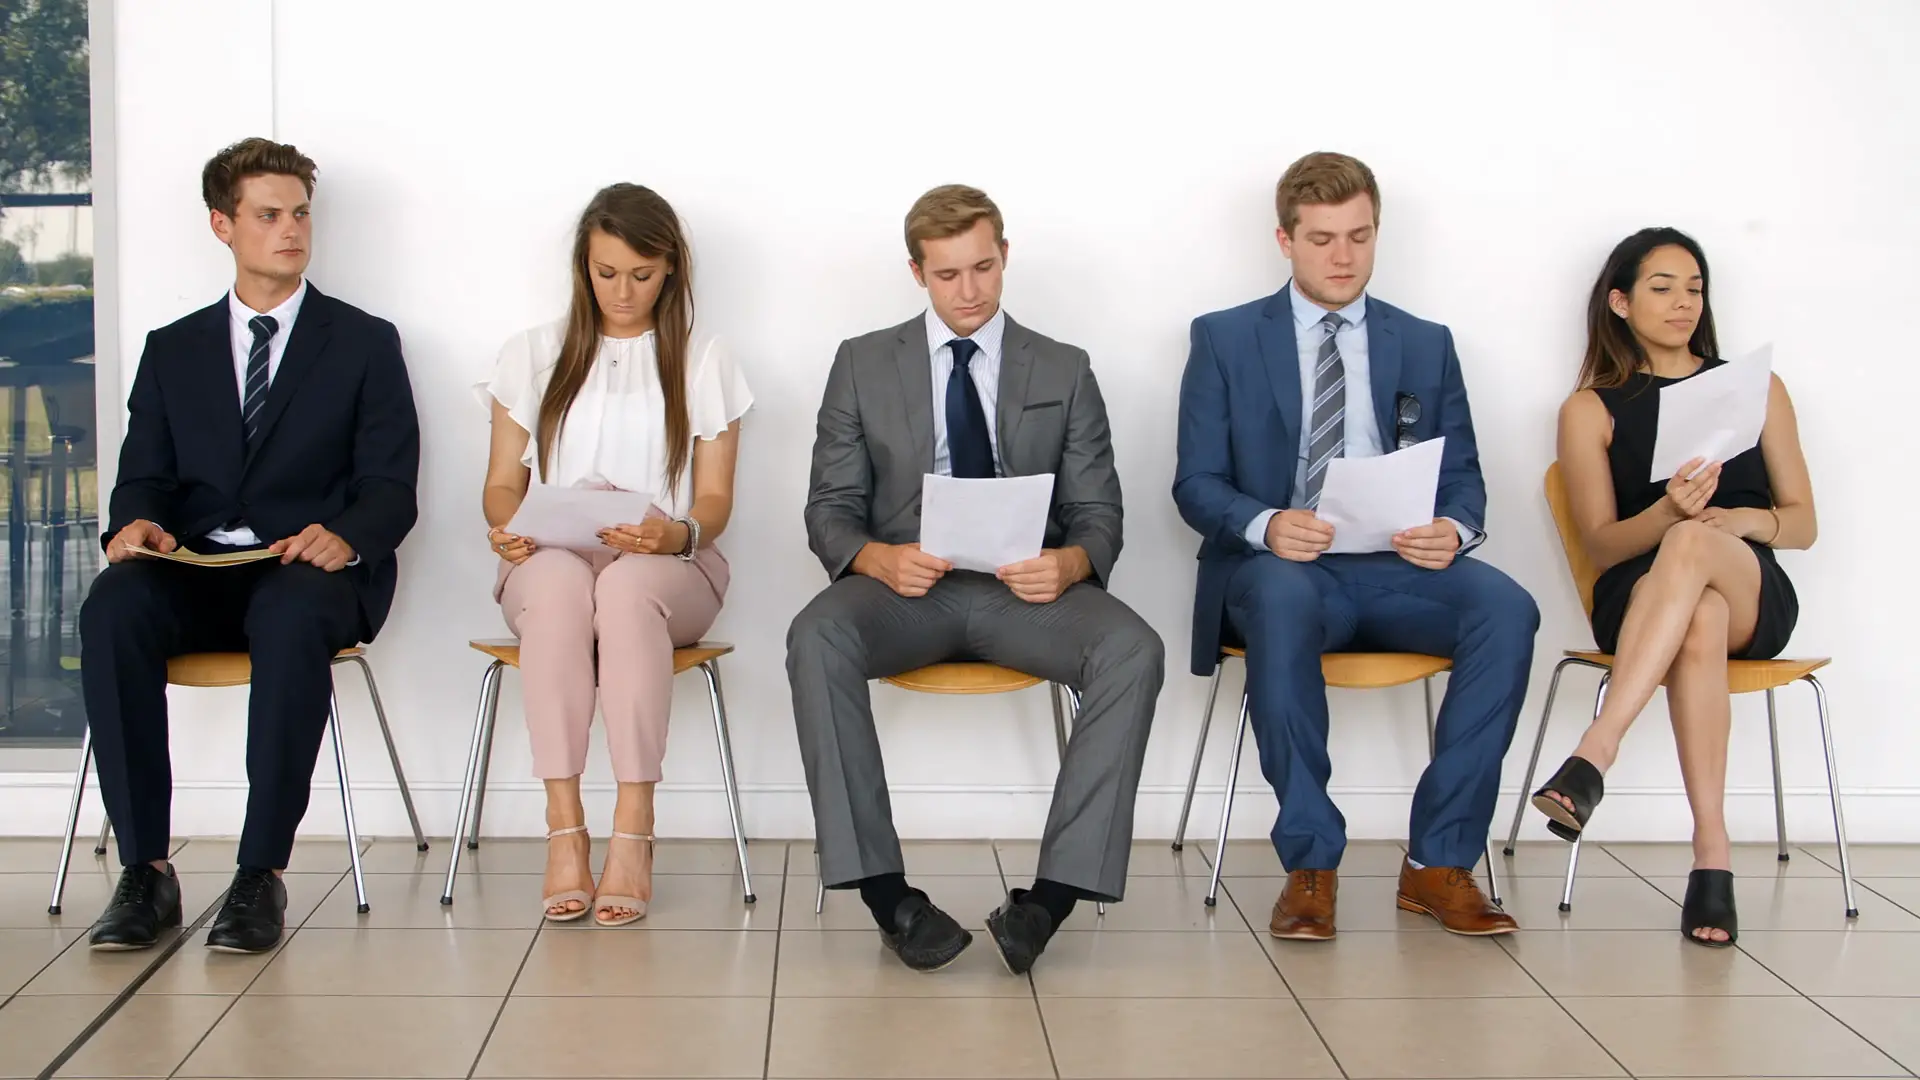 Group Of Job Candidates Waiting For Interview In Office ...